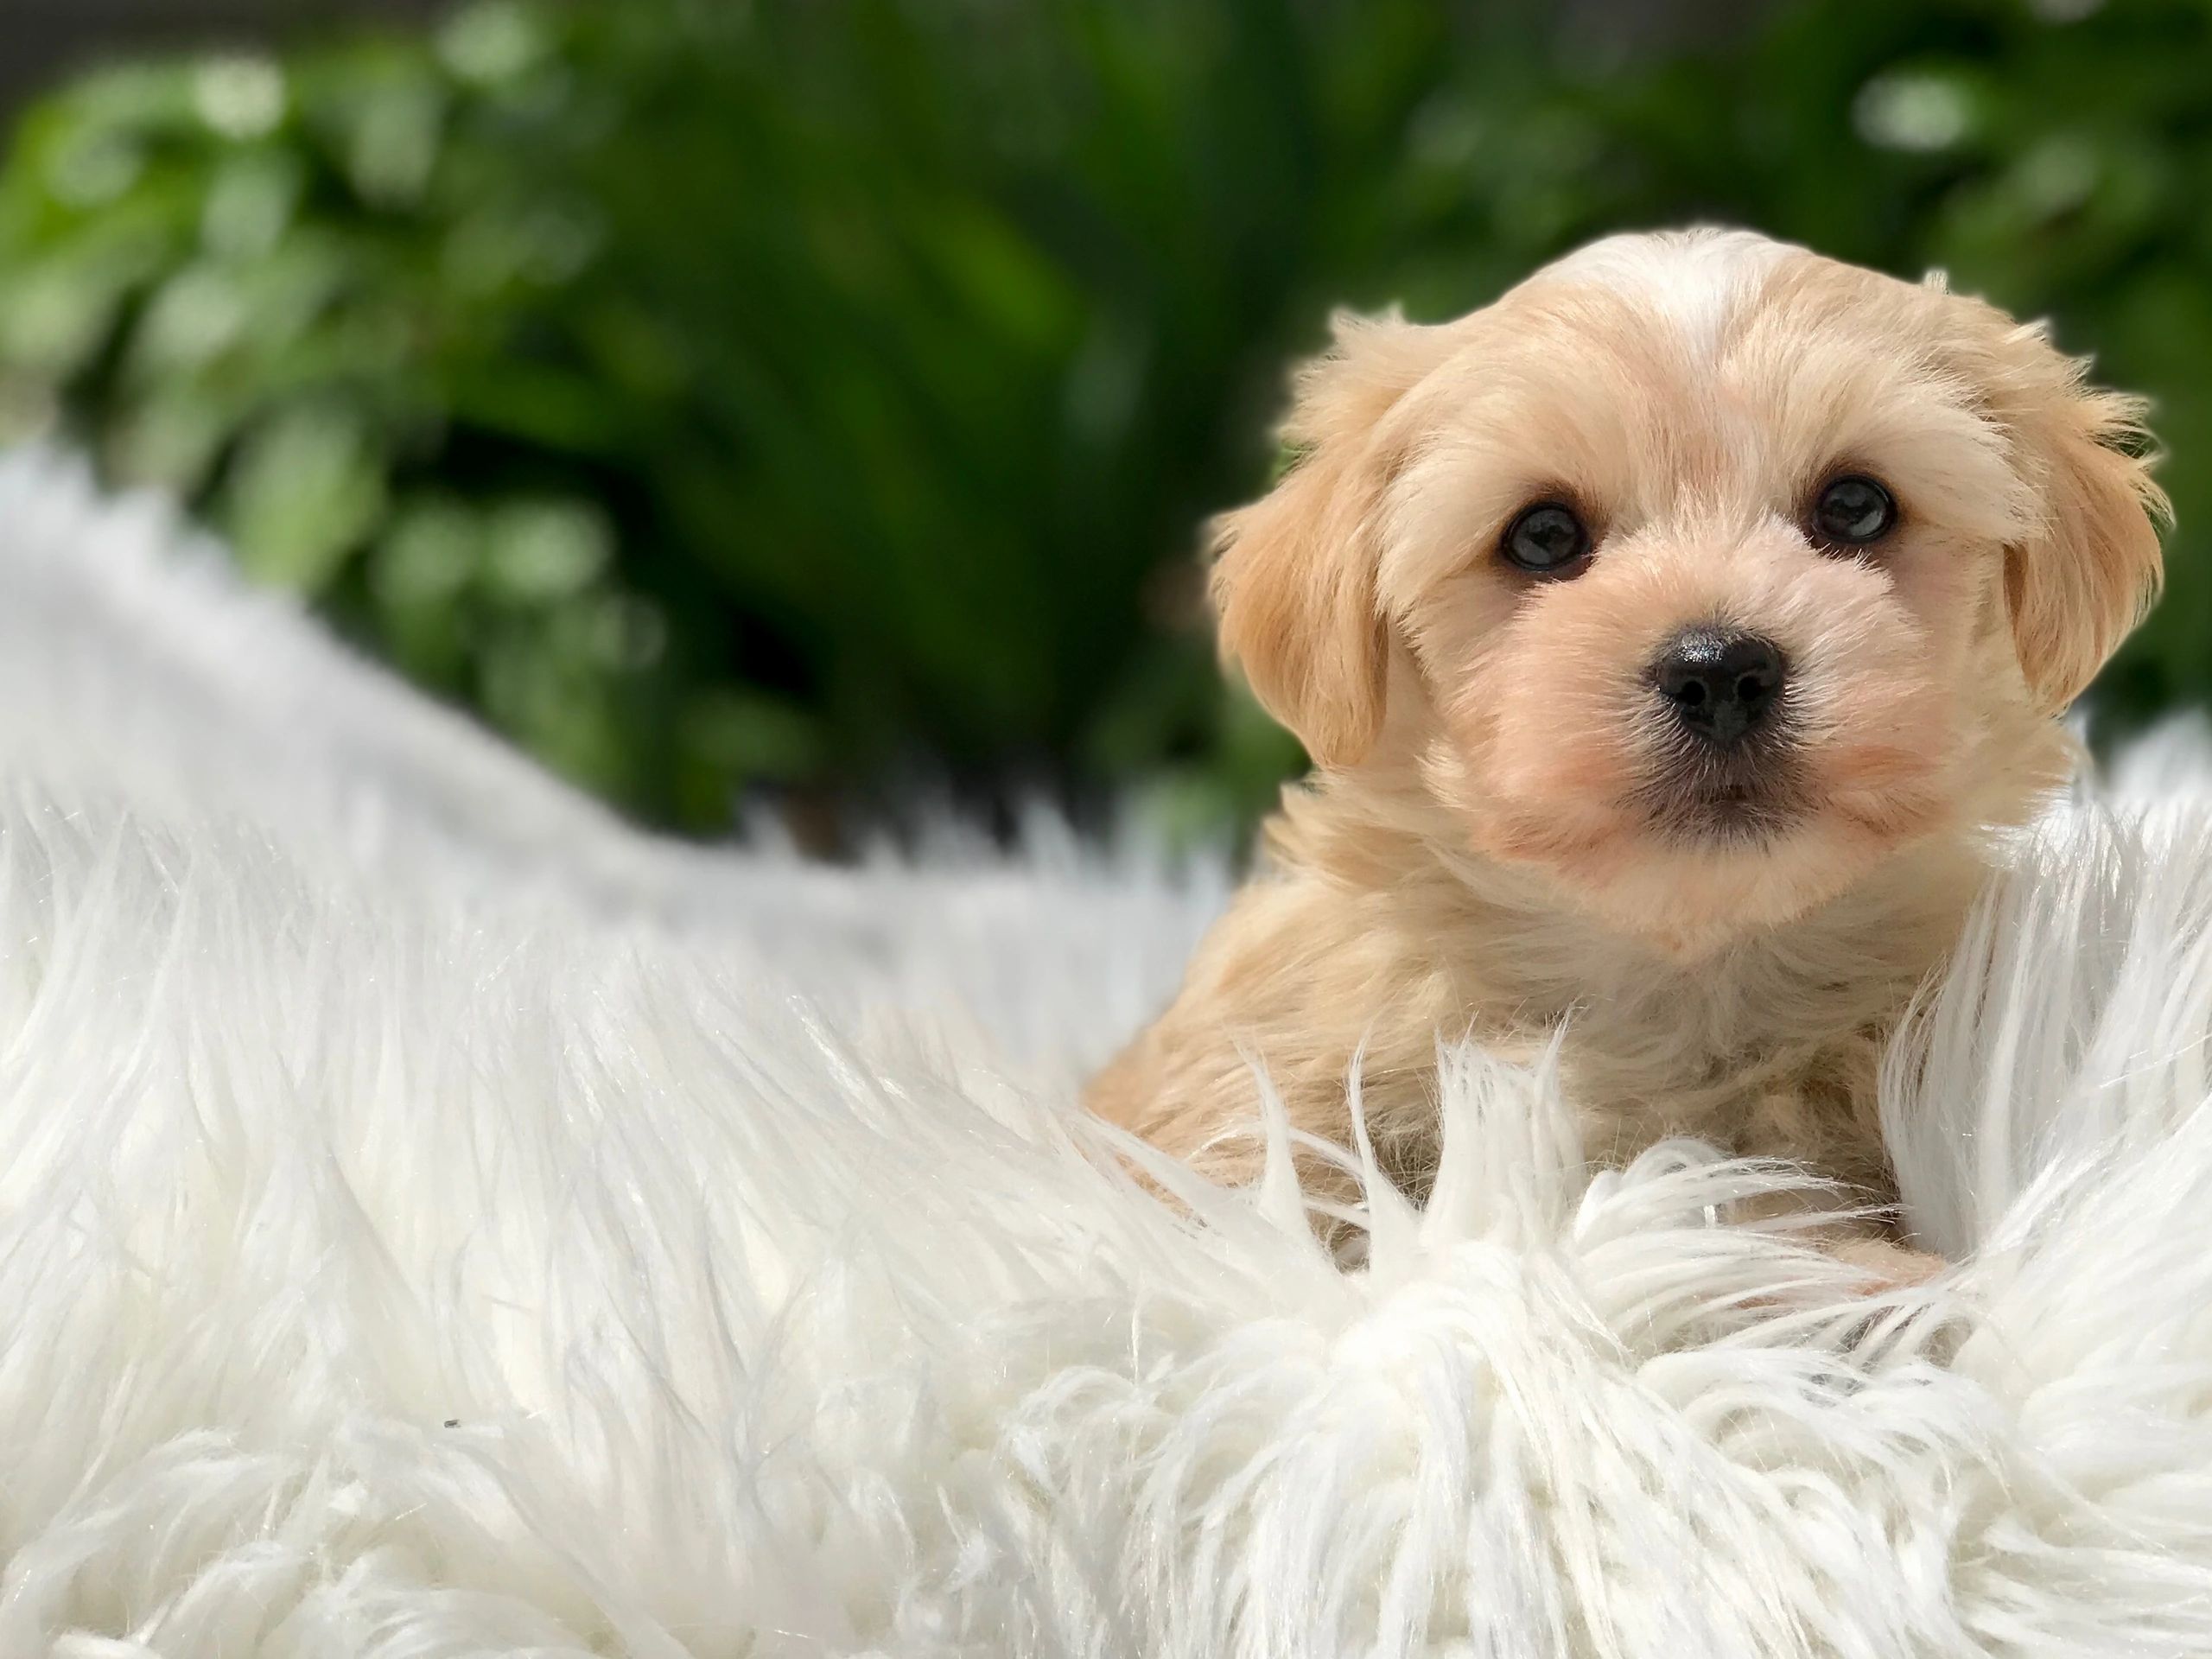 Four Types of Dog Breeders: Find the Best Breeder For Your New Puppy